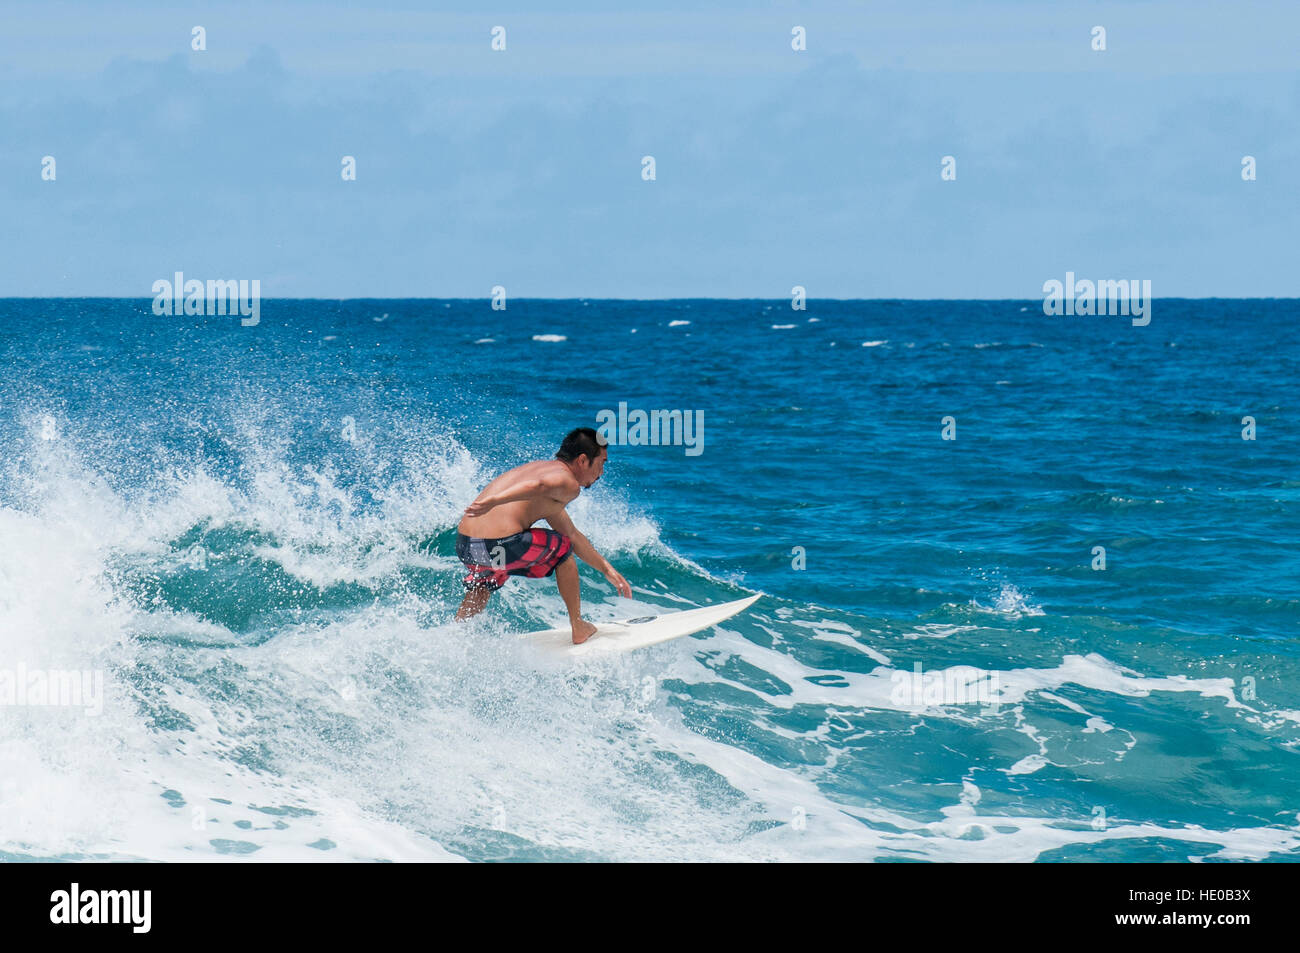 Surfing at Sunset Beach, North Shore, Oahu, Hawaii. Stock Photo